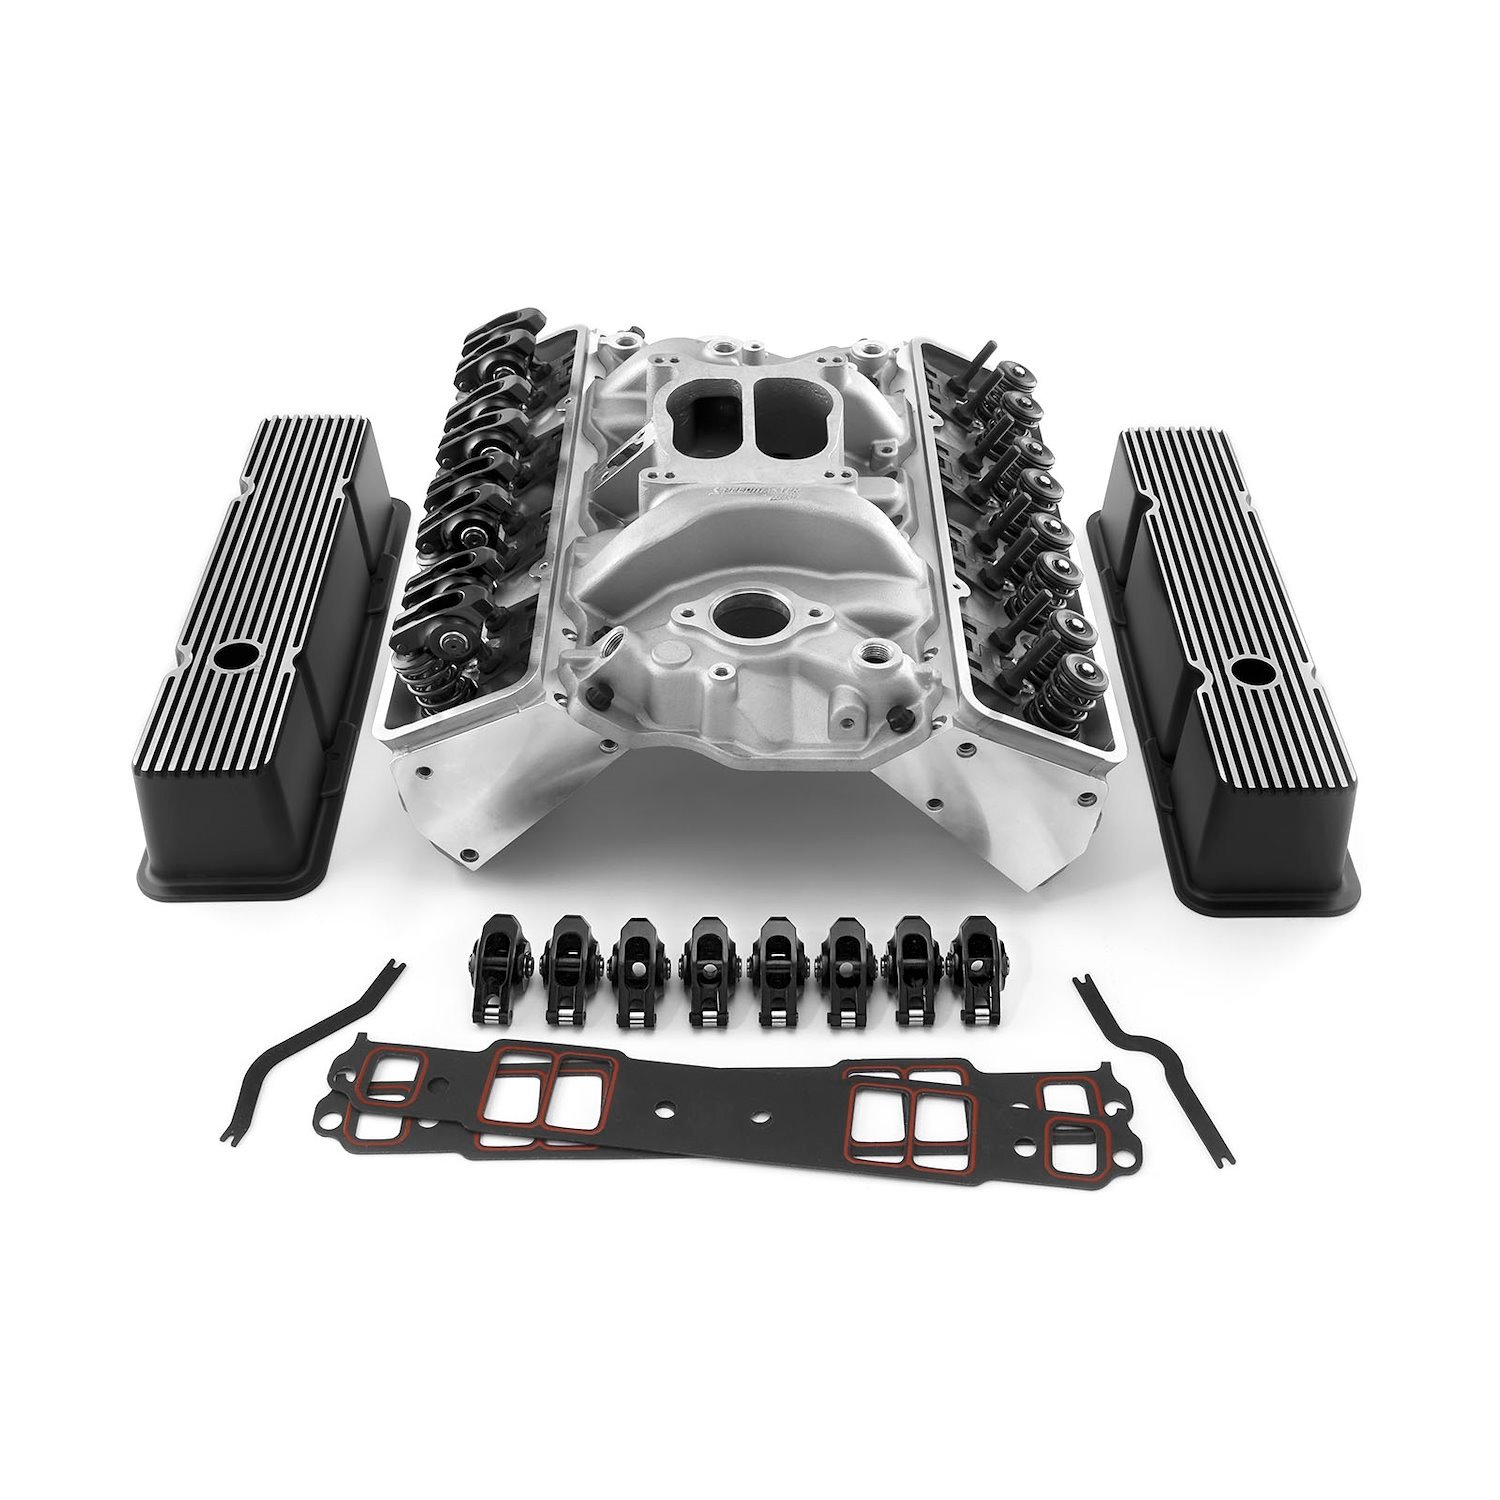 1-435-004 Chevy SBC 350 Straight Cylinder Head Top End Engine Combo Kit Hydraulic Flat Tap